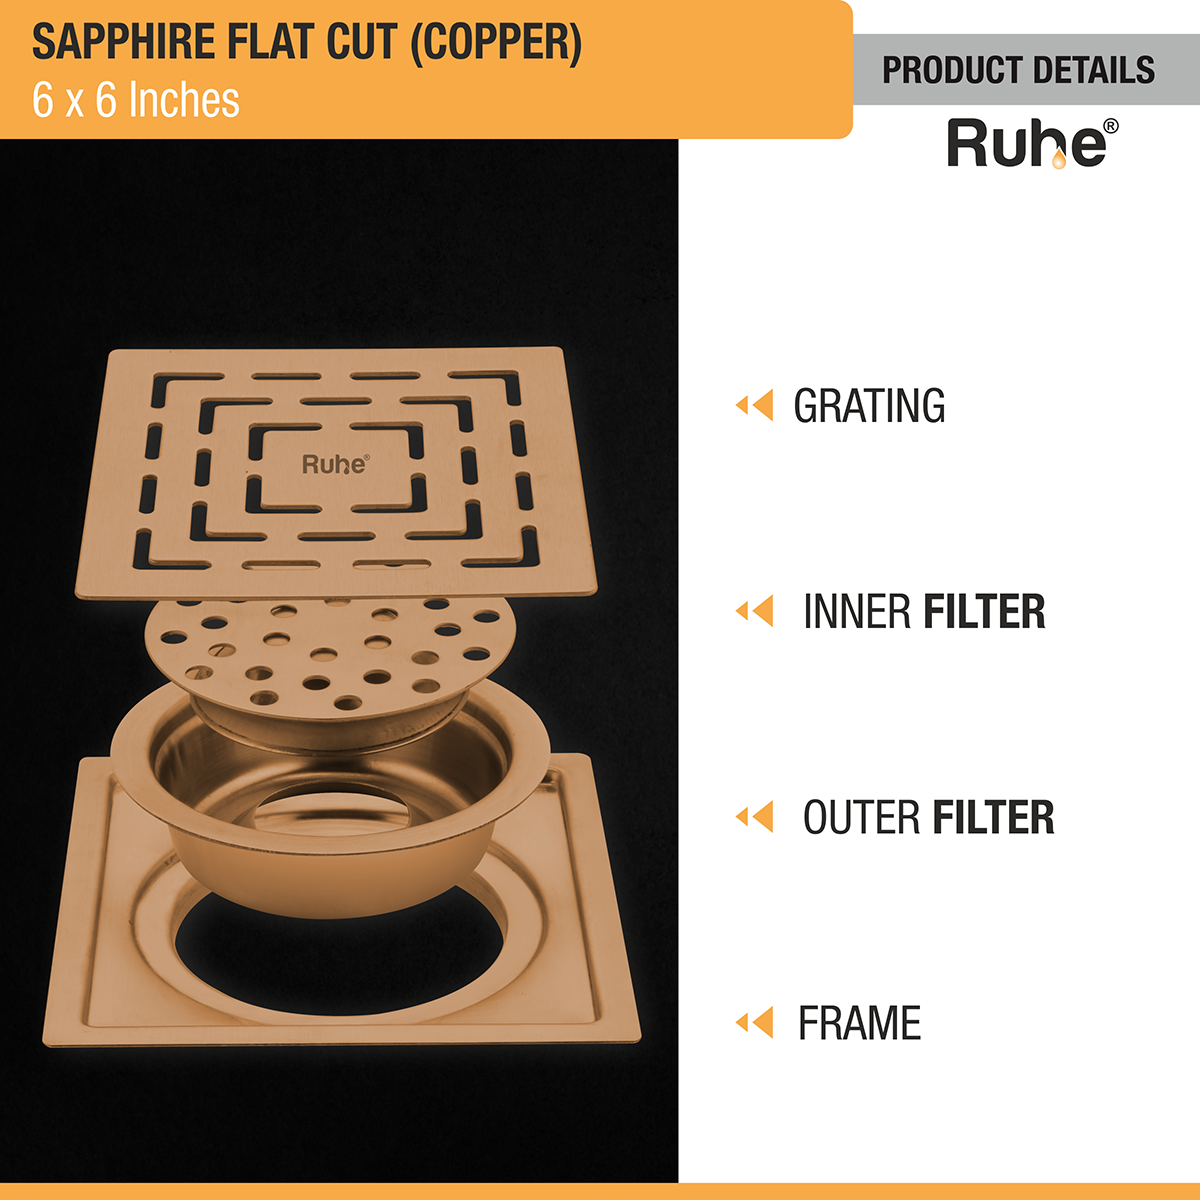 Sapphire Square Flat Cut Floor Drain in Antique Copper PVD Coating (6 x 6 Inches) product details